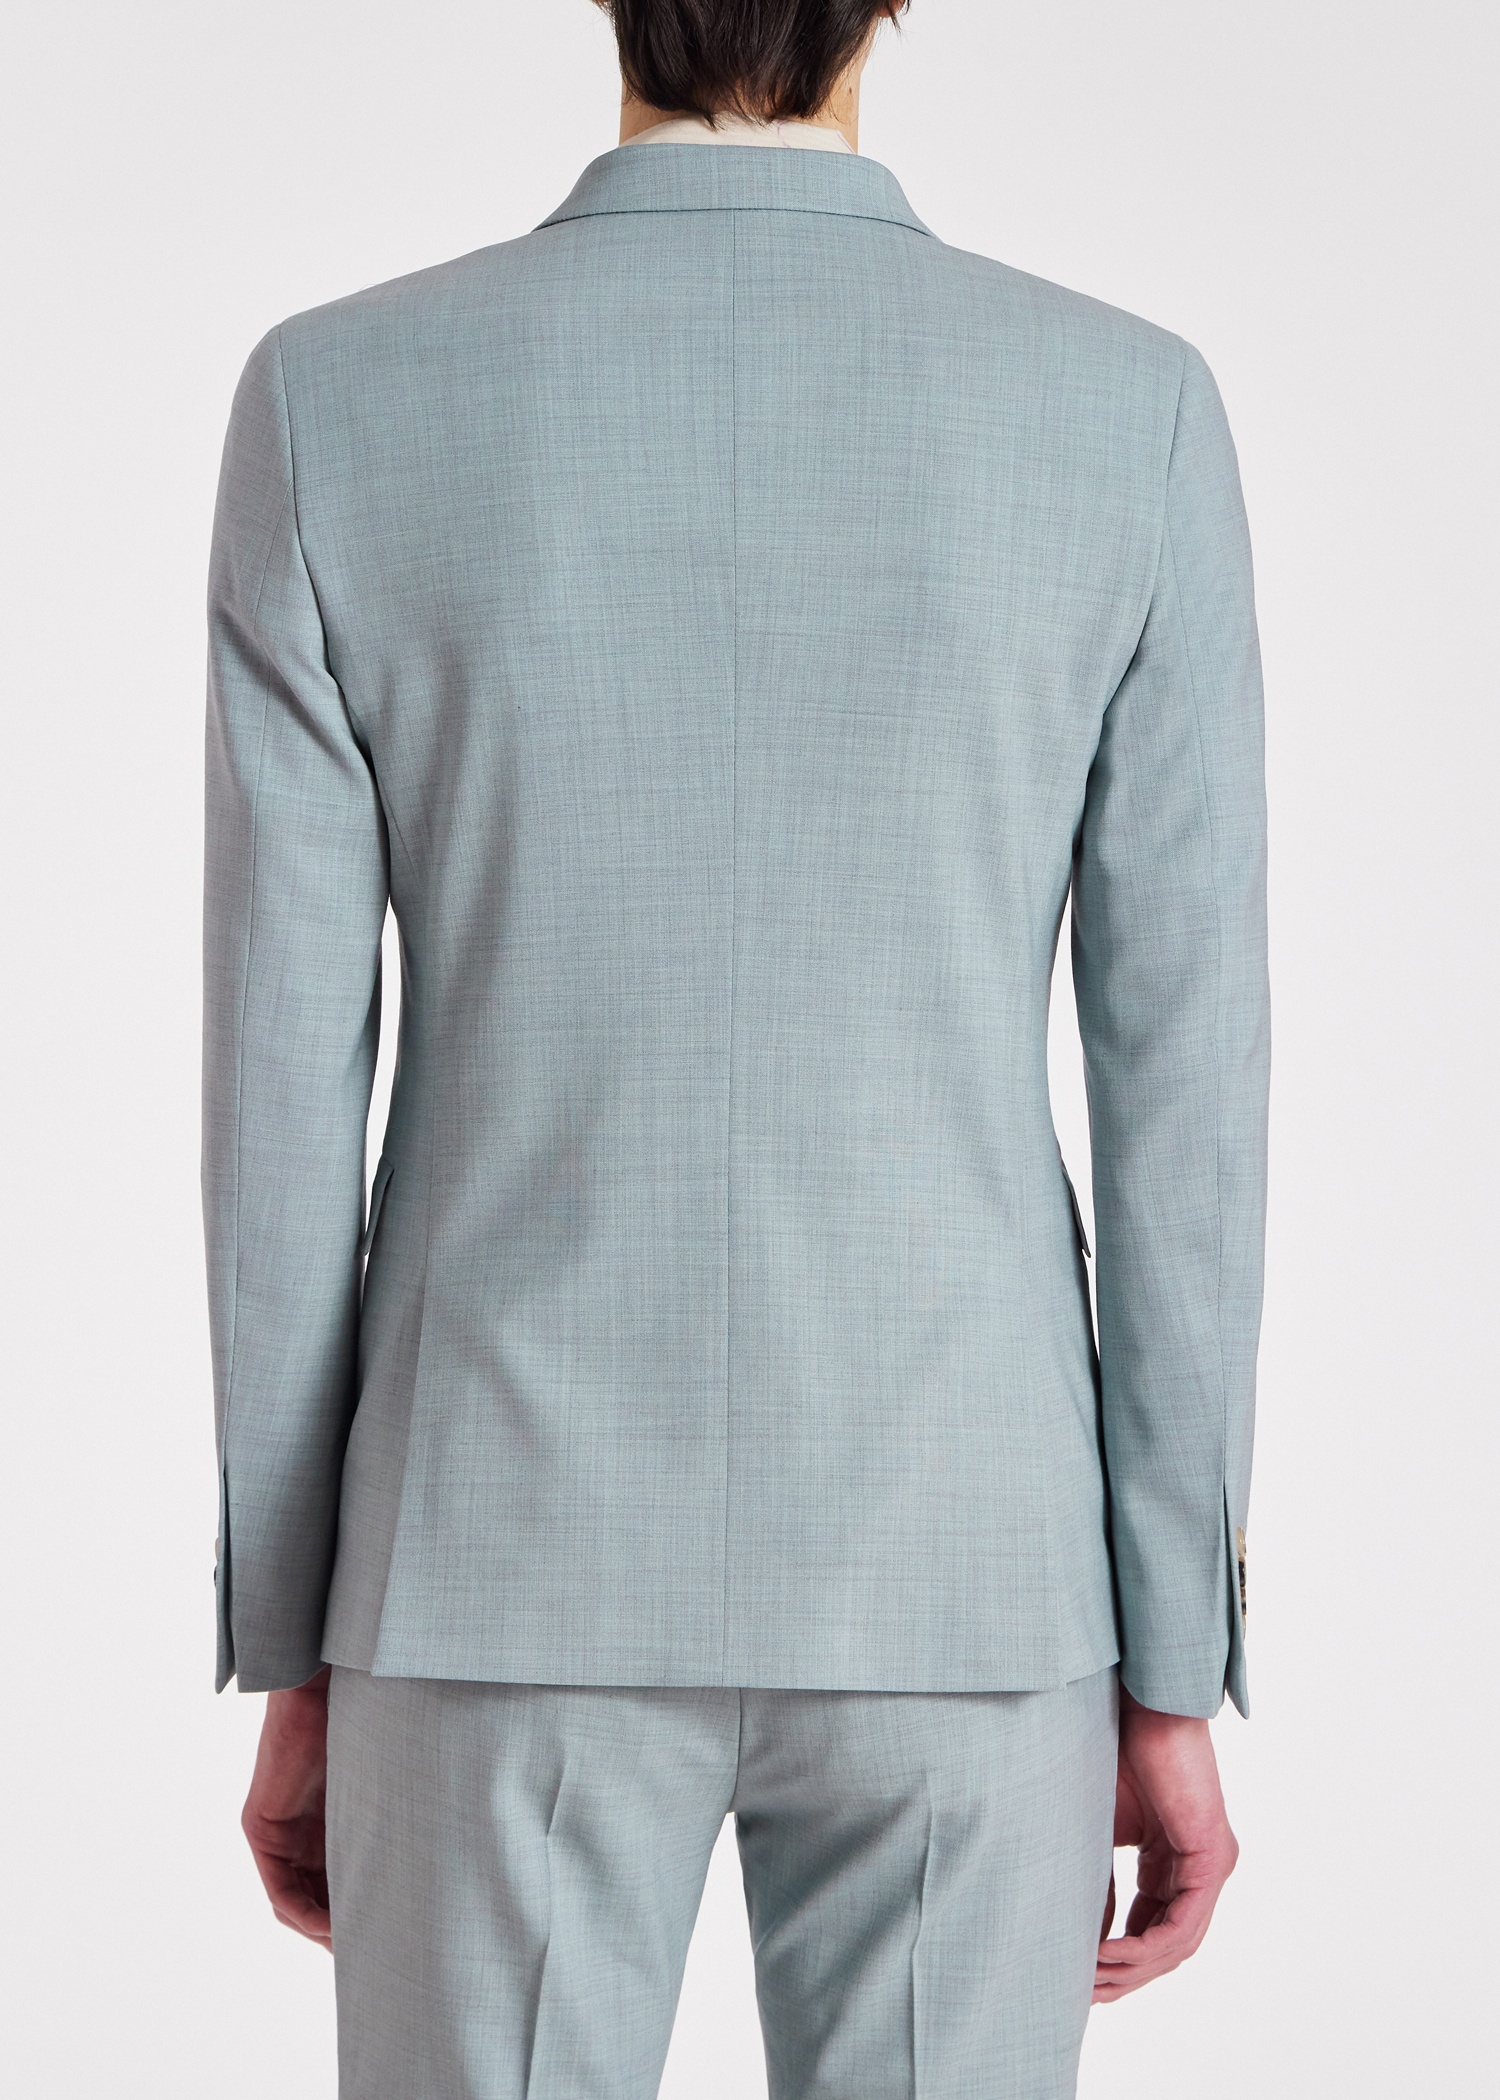 The Kensington - Light Blue Marl Overdyed Stretch-Wool Suit - 9